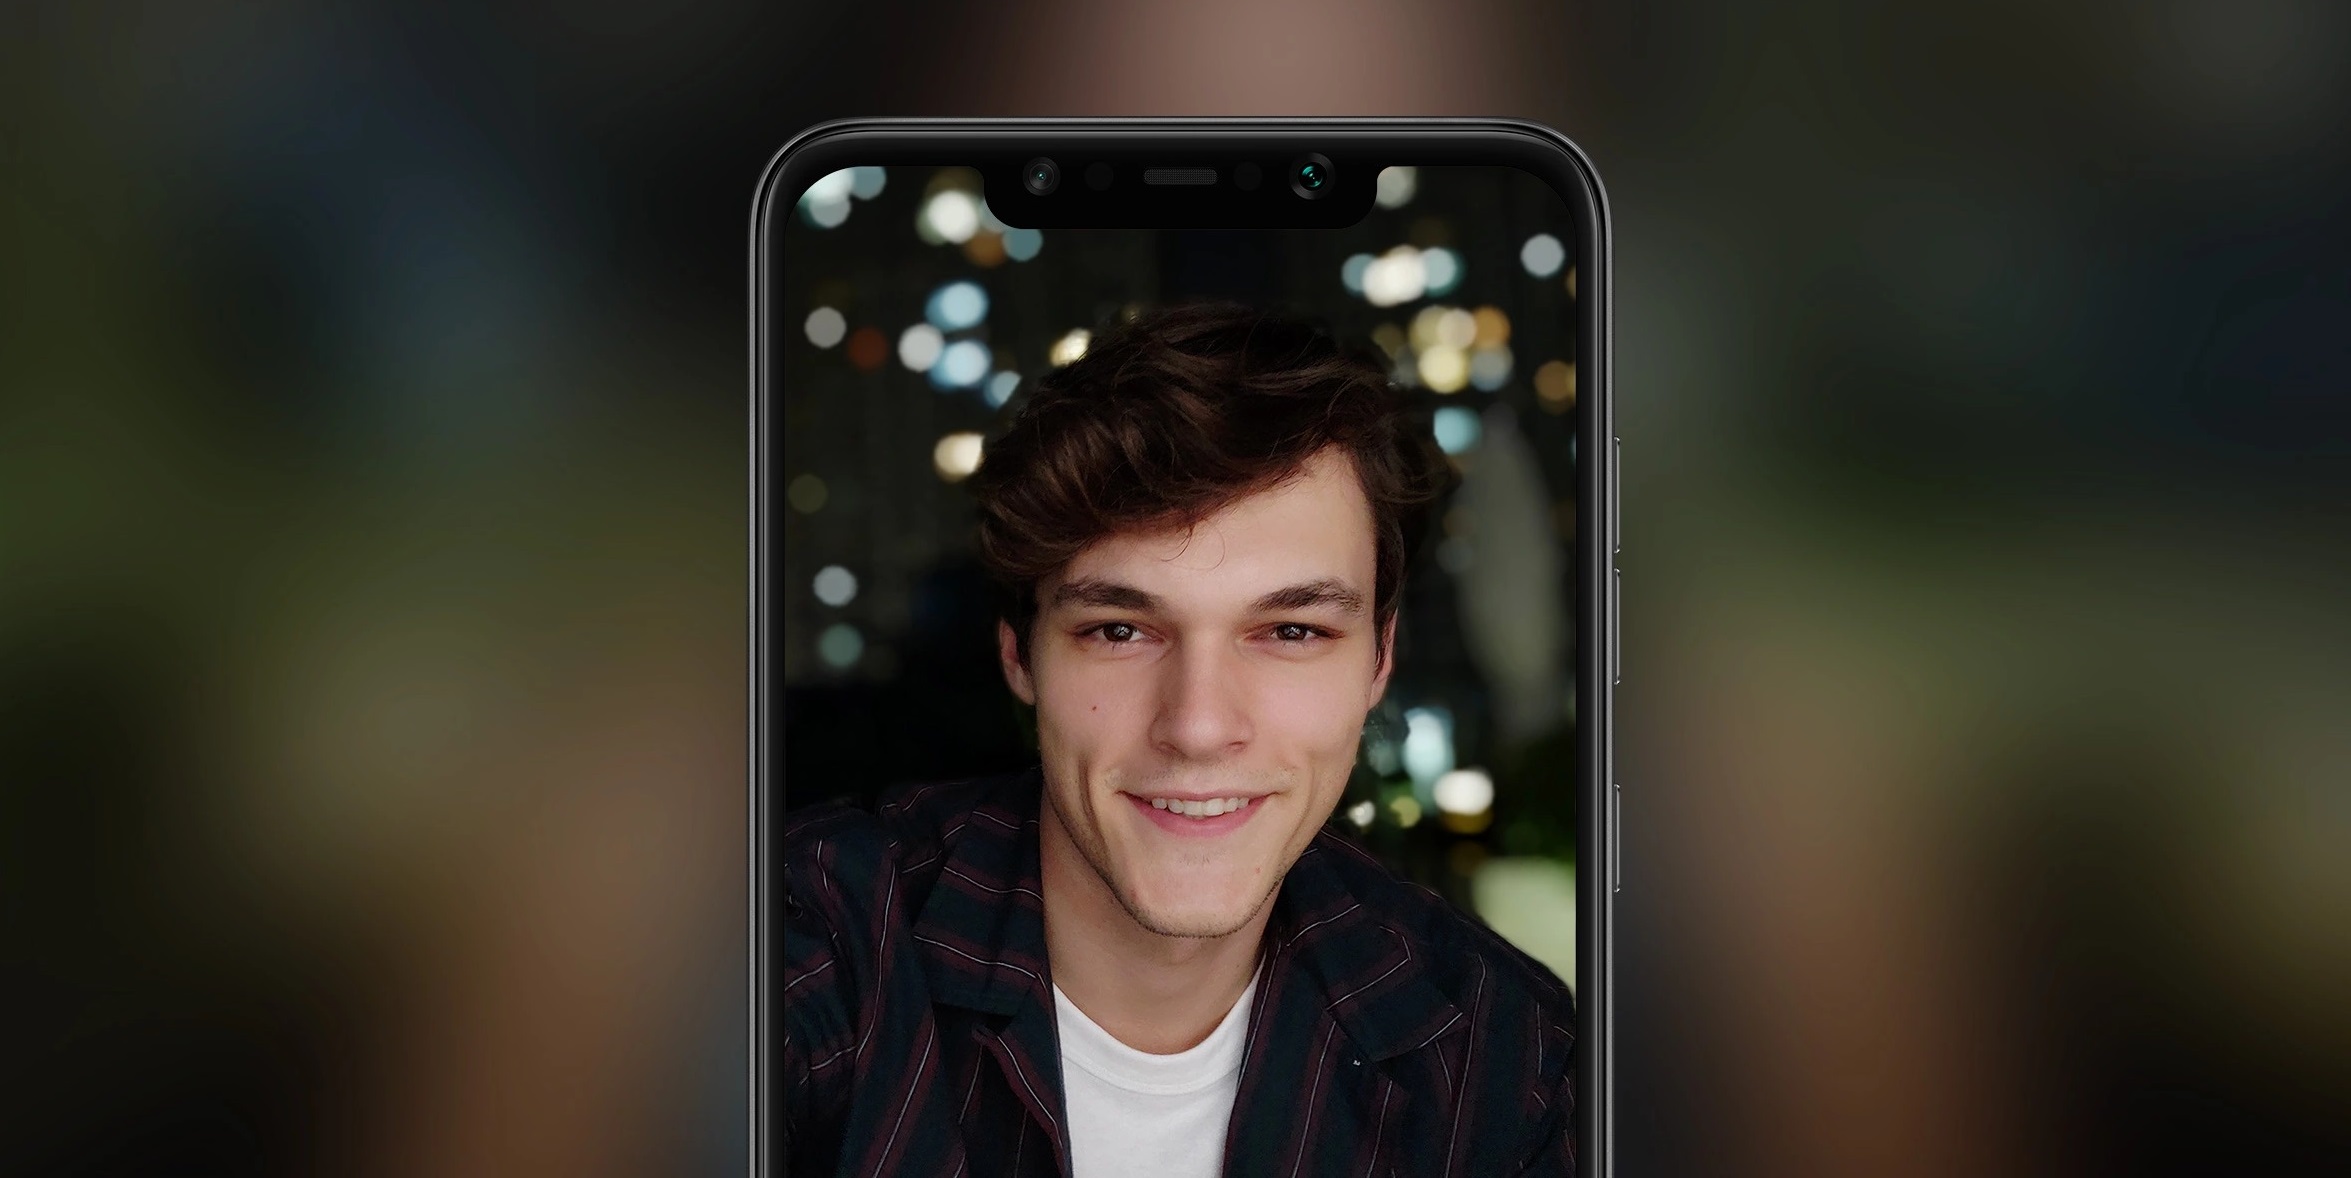 Pocophone-f1-review-7